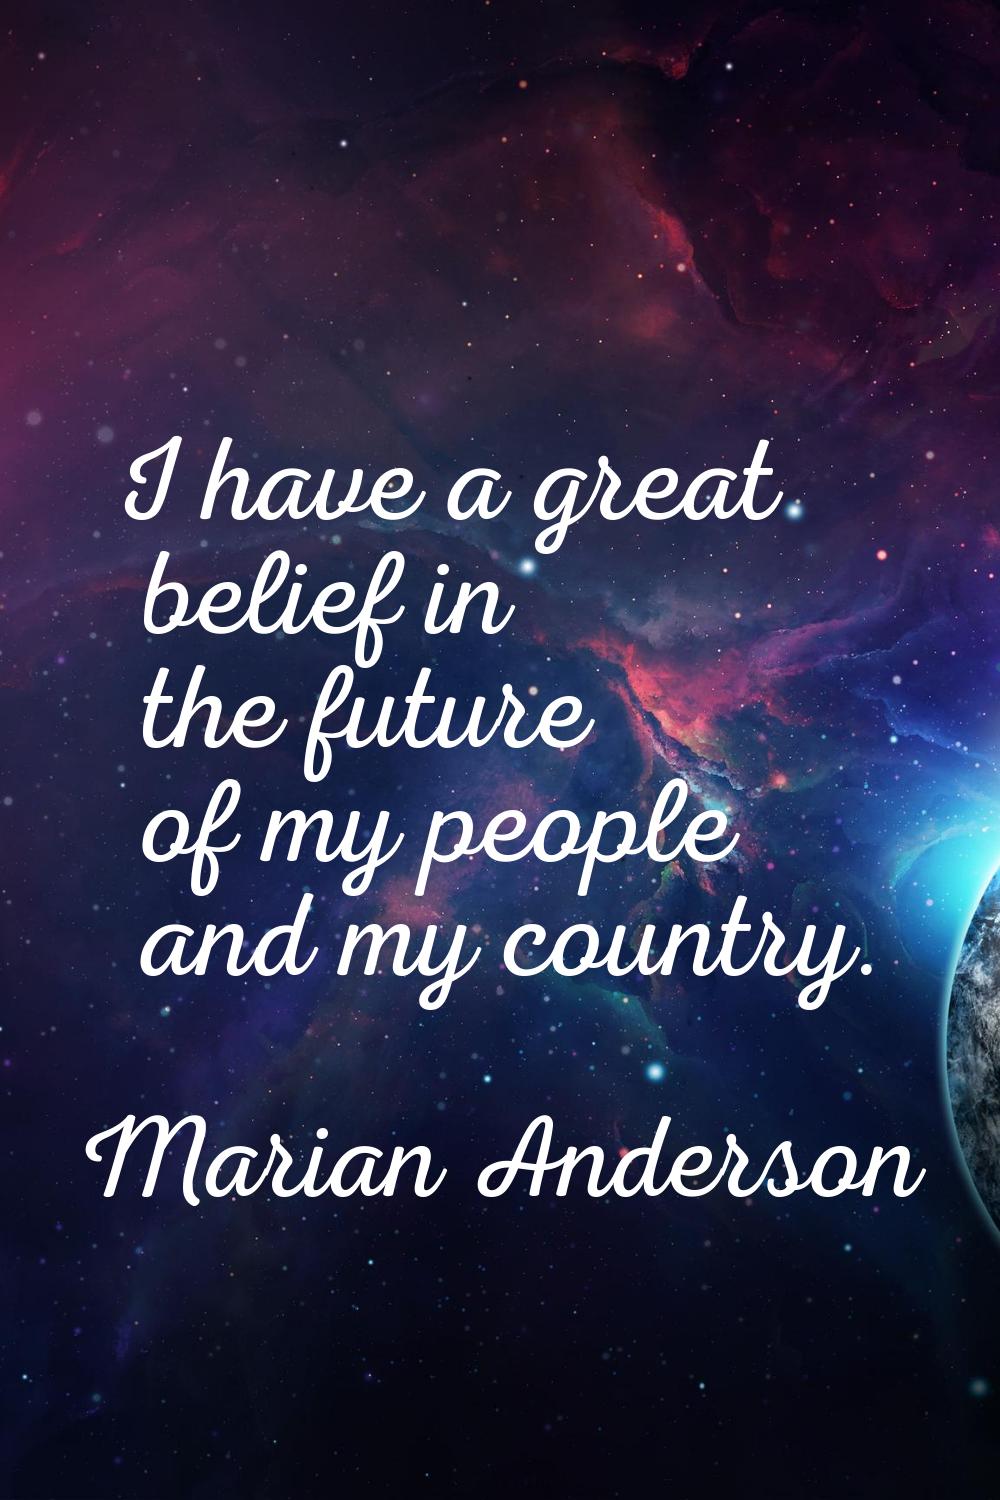 I have a great belief in the future of my people and my country.